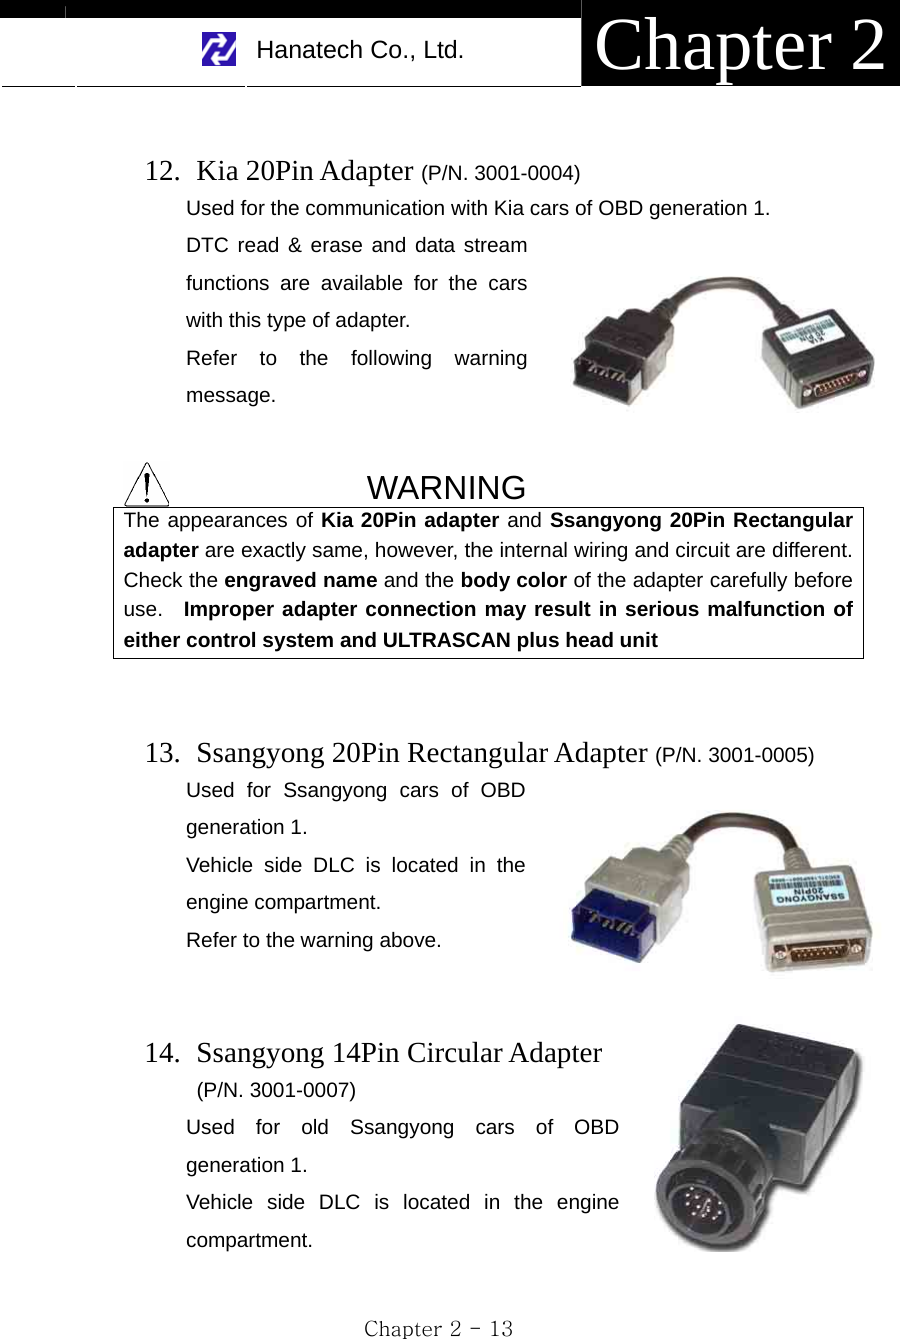     Hanatech Co., Ltd.  Chapter 2 Chapter 2 - 13      12.  Kia 20Pin Adapter (P/N. 3001-0004) Used for the communication with Kia cars of OBD generation 1.   DTC read &amp; erase and data stream functions are available for the cars with this type of adapter. Refer to the following warning message.   WARNING The appearances of Kia 20Pin adapter and Ssangyong 20Pin Rectangular adapter are exactly same, however, the internal wiring and circuit are different. Check the engraved name and the body color of the adapter carefully before use.  Improper adapter connection may result in serious malfunction of either control system and ULTRASCAN plus head unit   13.   Ssangyong 20Pin Rectangular Adapter (P/N. 3001-0005) Used for Ssangyong cars of OBD generation 1. Vehicle side DLC is located in the engine compartment. Refer to the warning above.   14.   Ssangyong 14Pin Circular Adapter  (P/N. 3001-0007) Used for old Ssangyong cars of OBD generation 1. Vehicle side DLC is located in the engine compartment.  